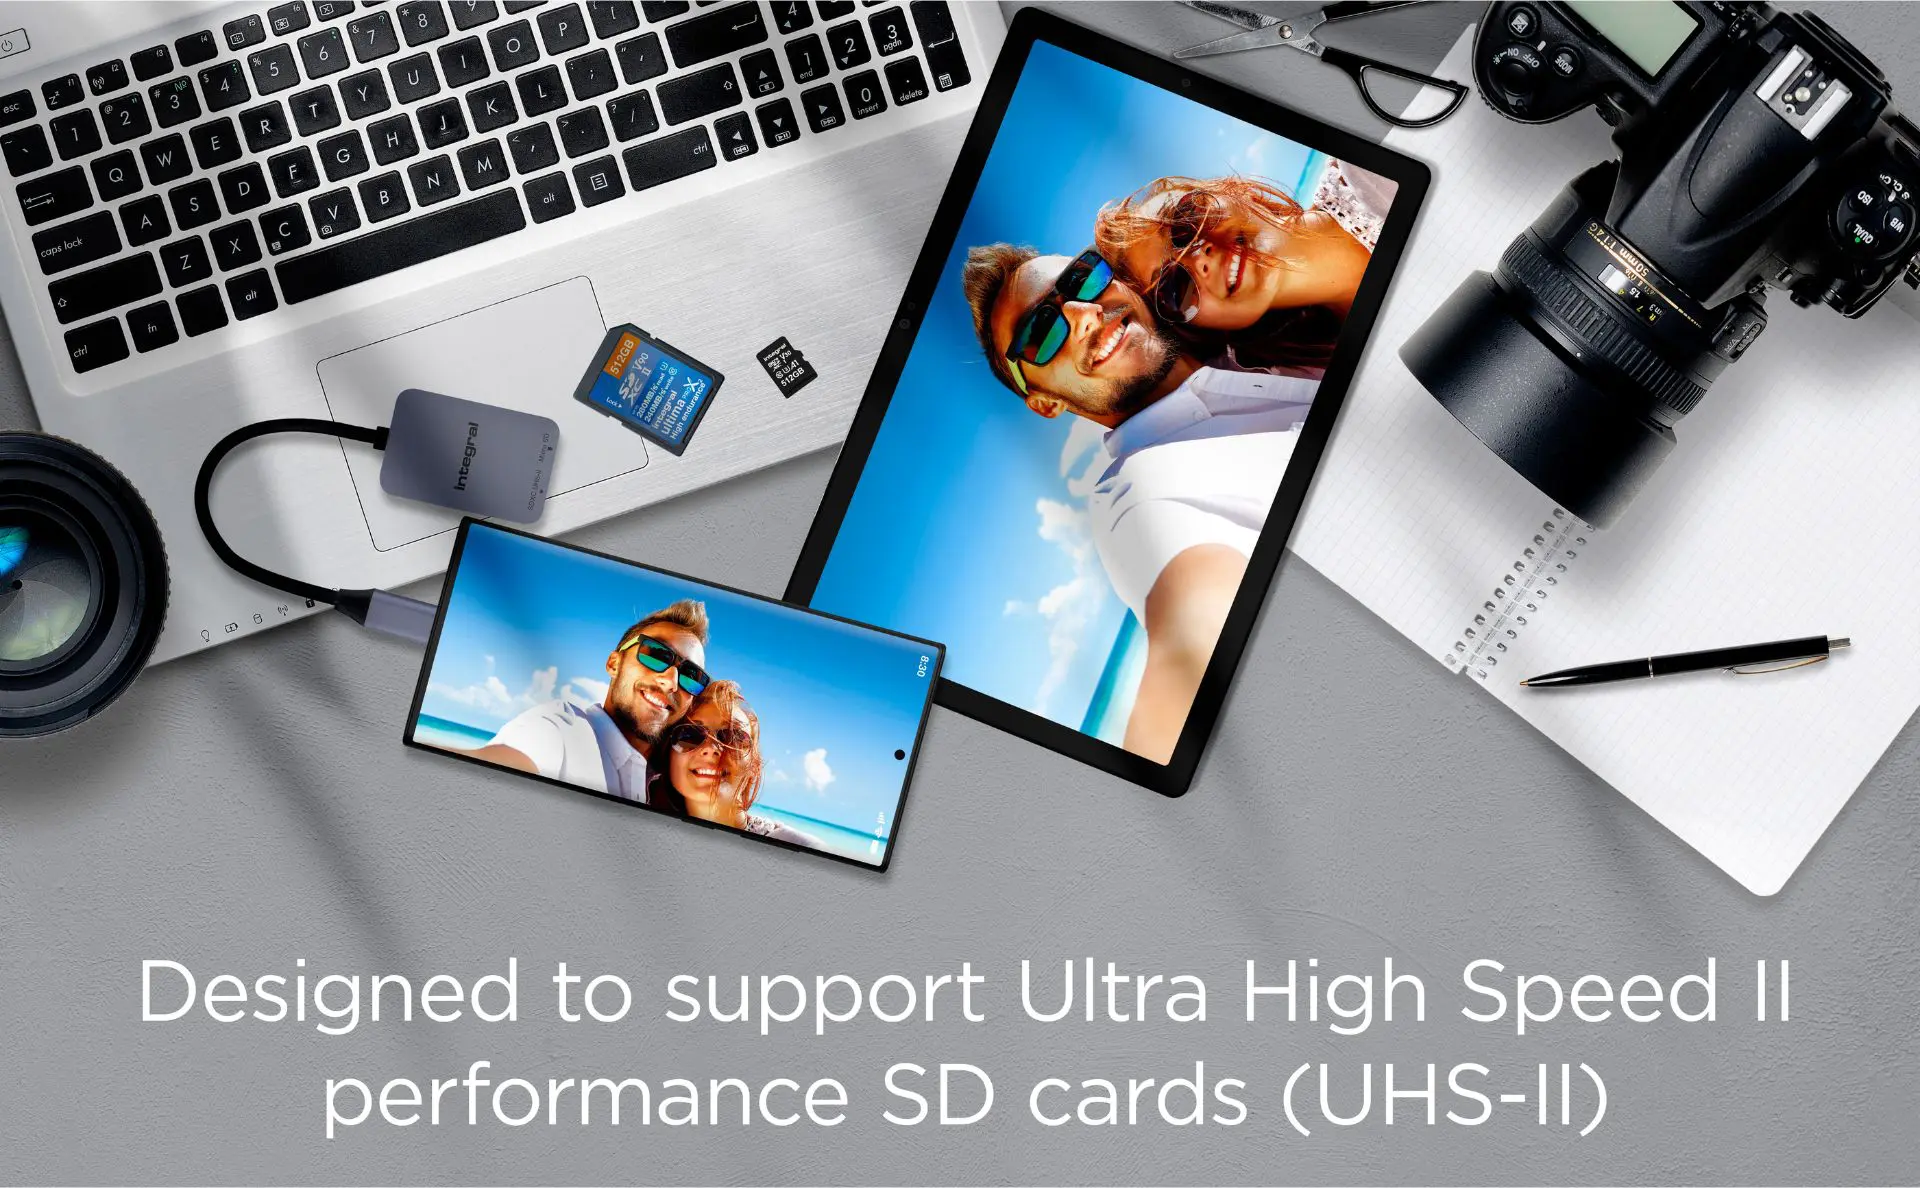 UHS-II Card Reader Type C USB 3.2 Supports Ultra High Speed II performance SD cards